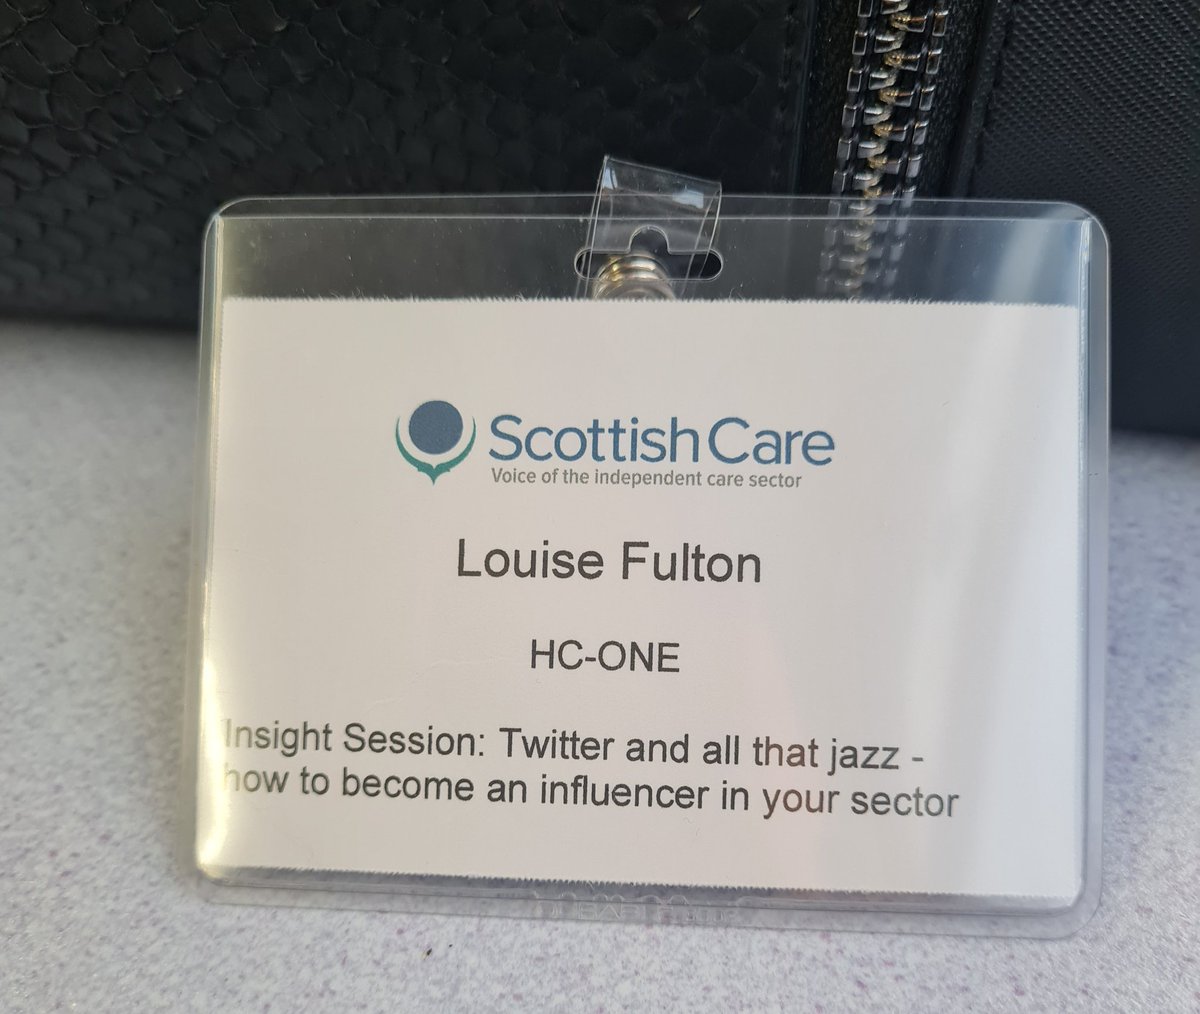 #ScotSCnurse23 Great day today. Finding some much needed inspiration and meeting people within Social Care -  Face to Face 😁
#shinealight #careaboutcare @scottishcare